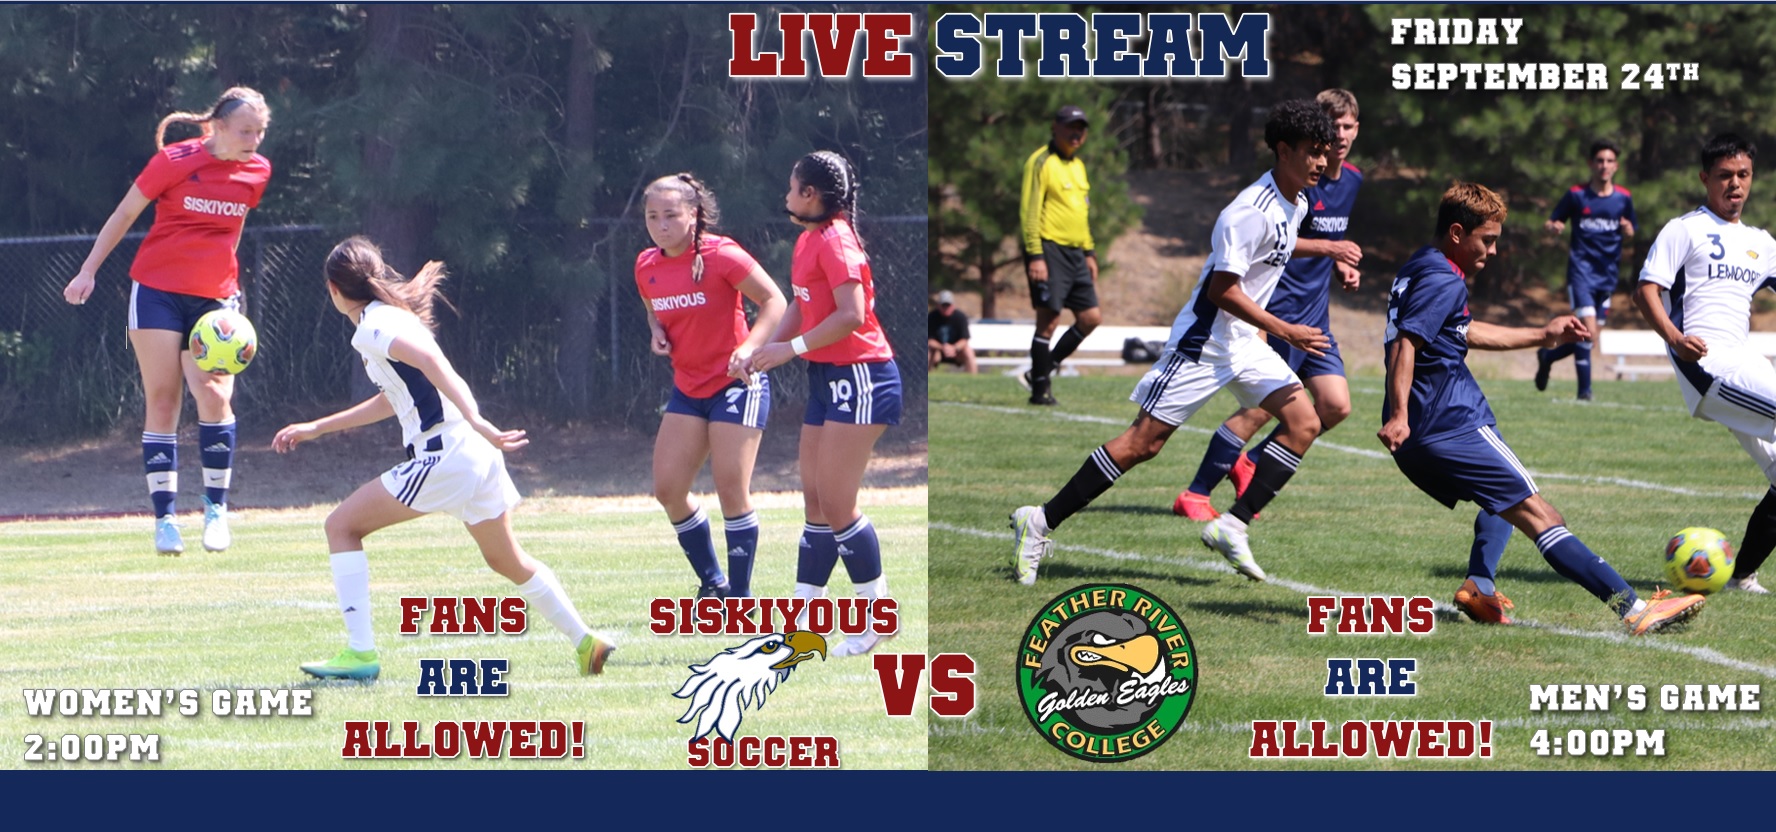 Live stream College of the Siskiyous Soccer versus Feather River College.  Women's Game at 2pm and Men's Game at 4pm.